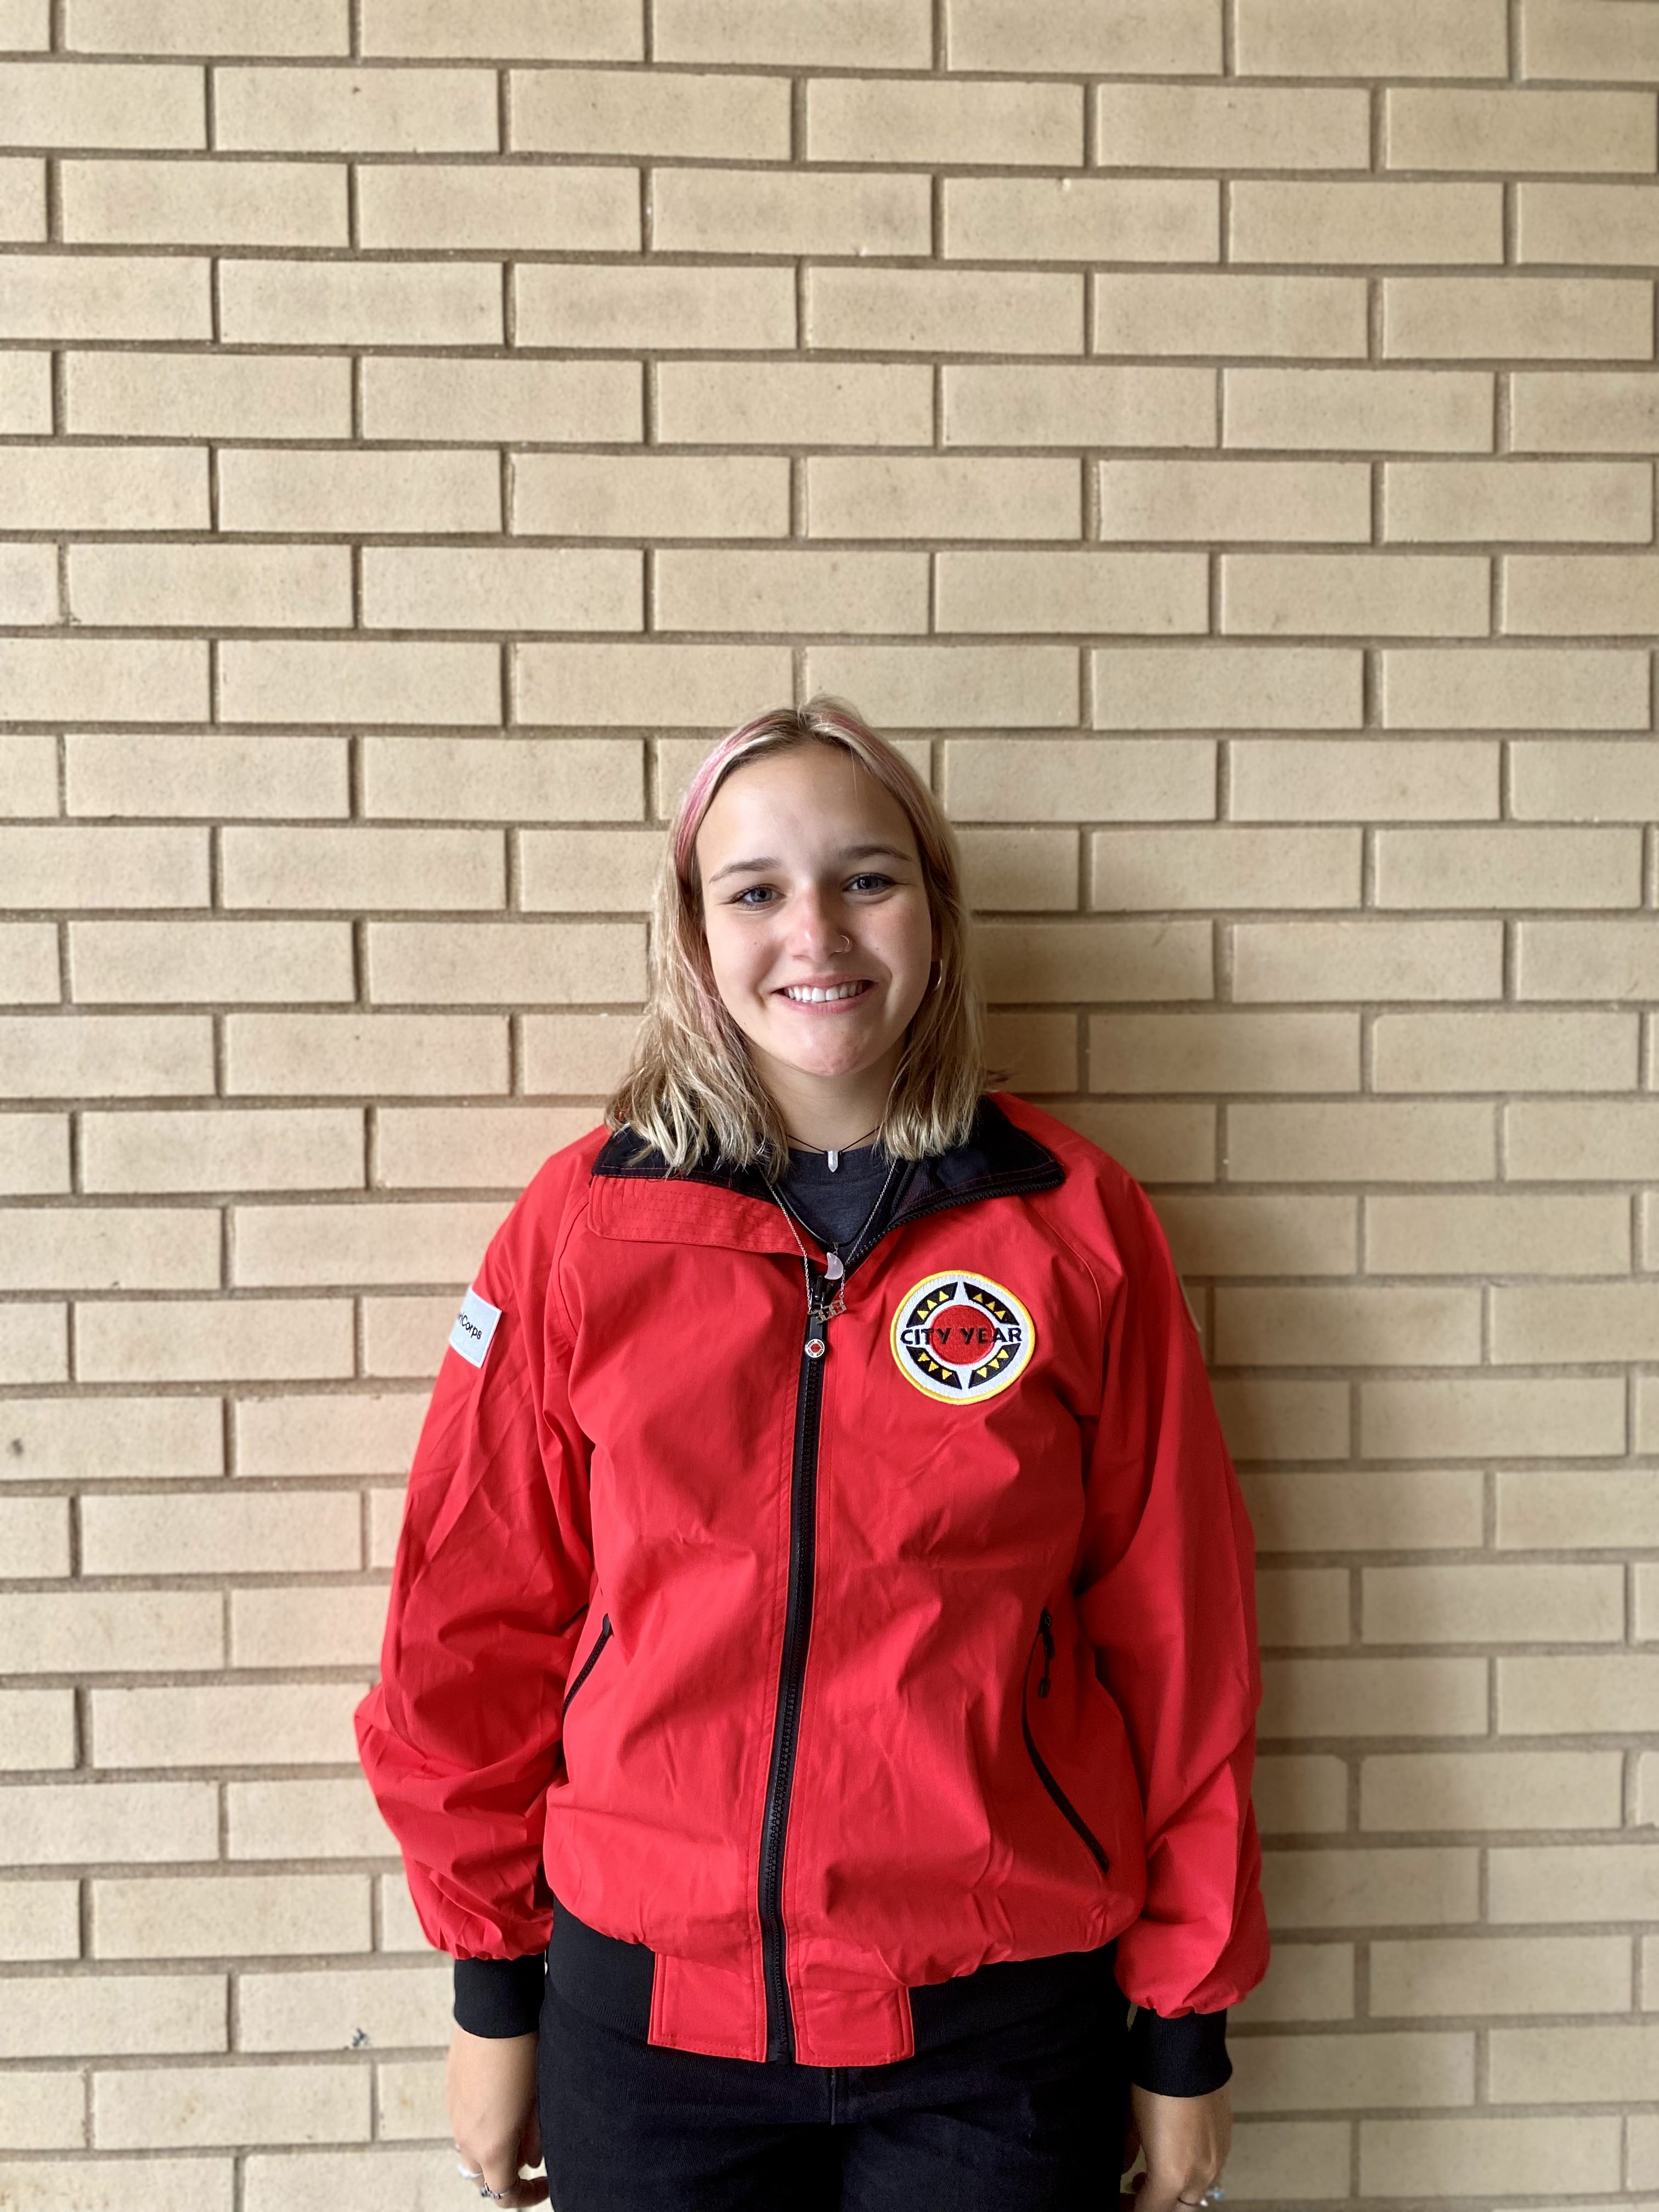 Light-skinned woman with blond hair wearing red City Year jacket